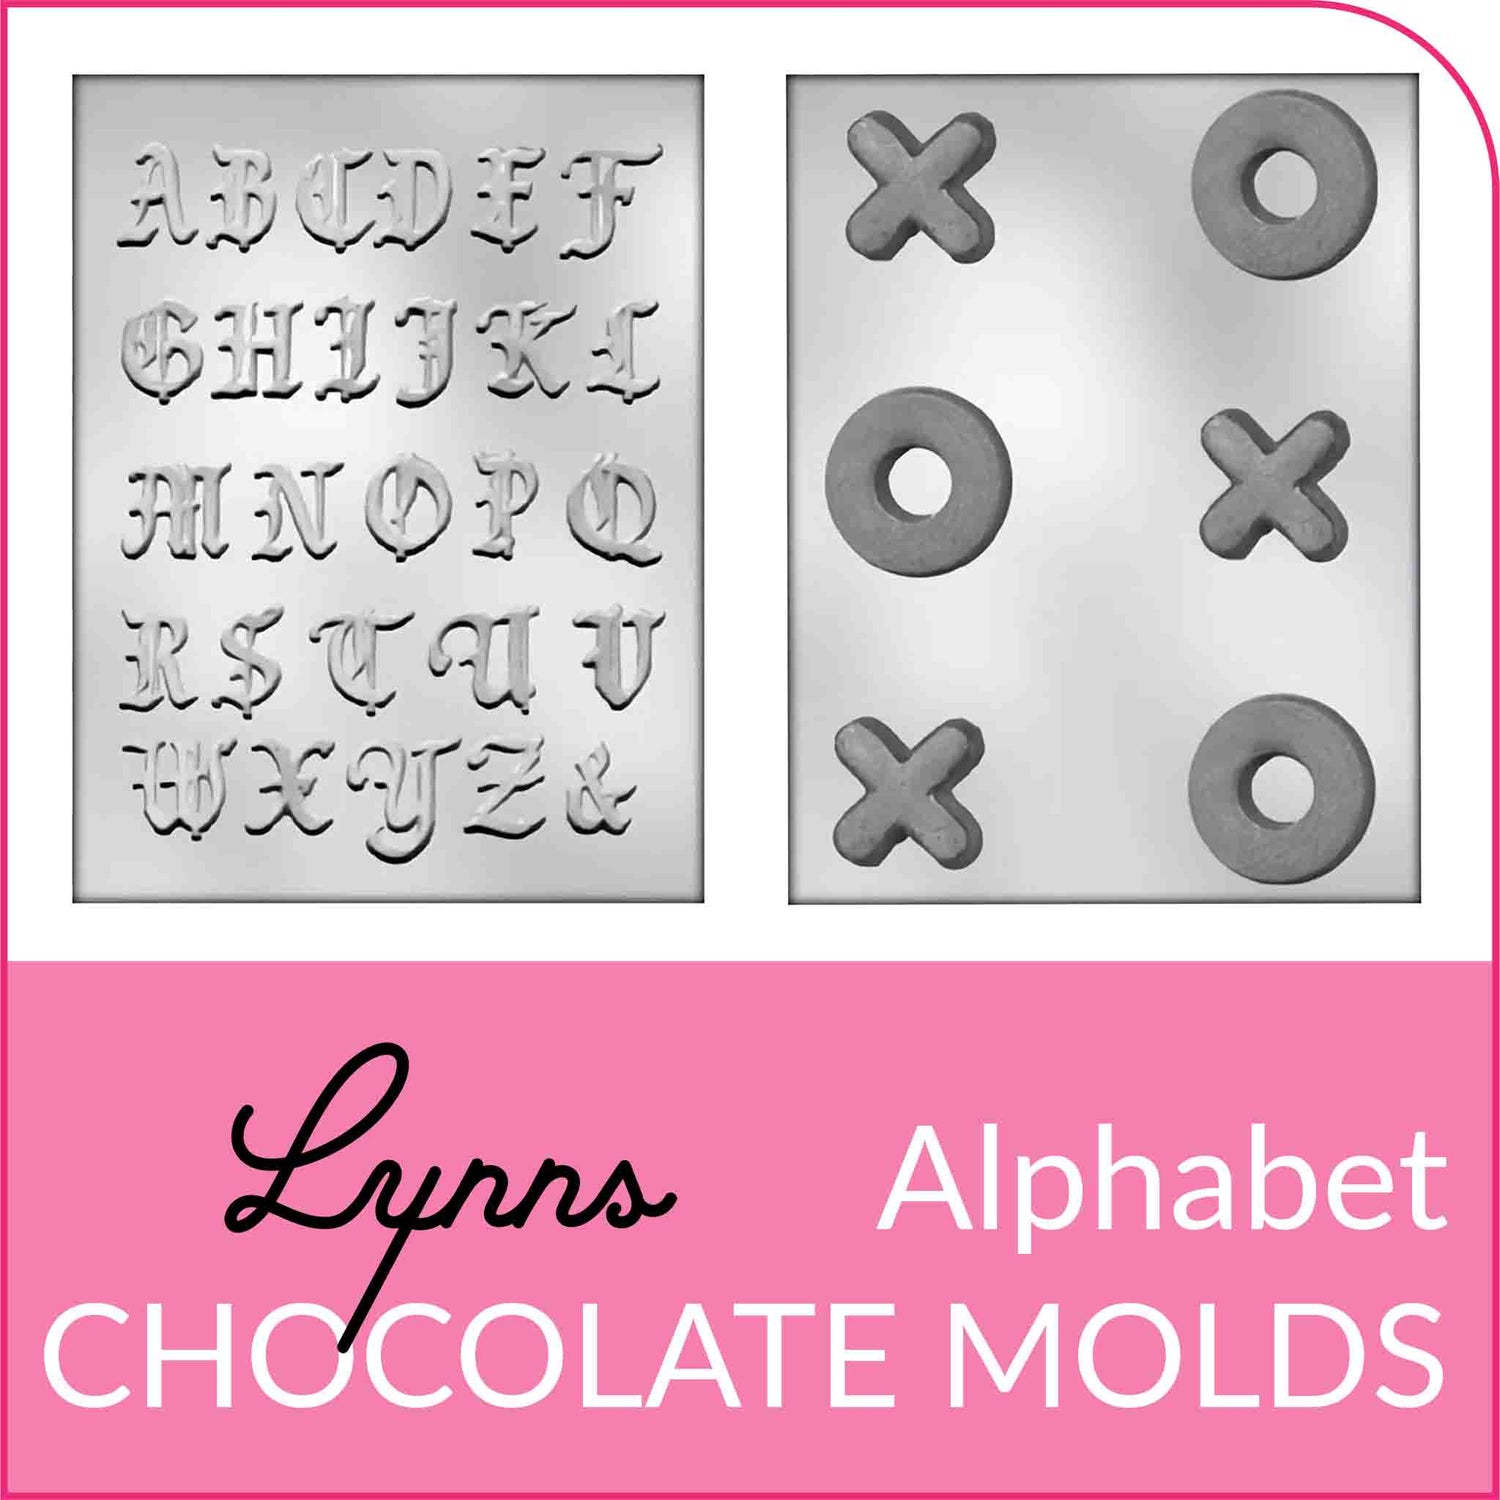 Shop Alphabet & Letter Chocolate Molds from Lynn's